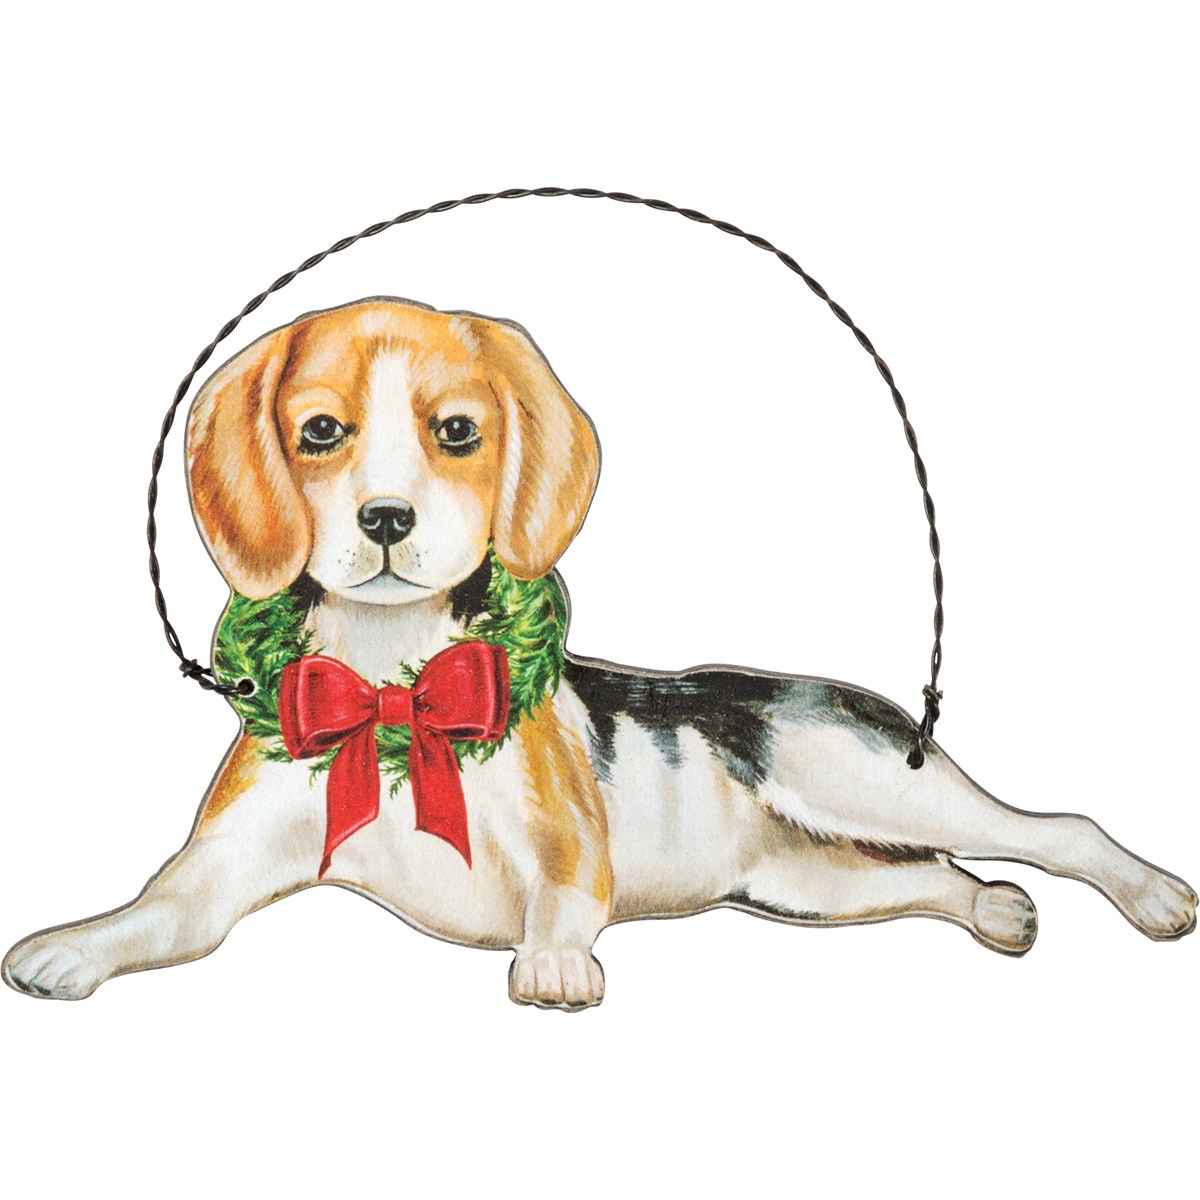 Christmas Beagle Ornament - Wood, Paper, Wire